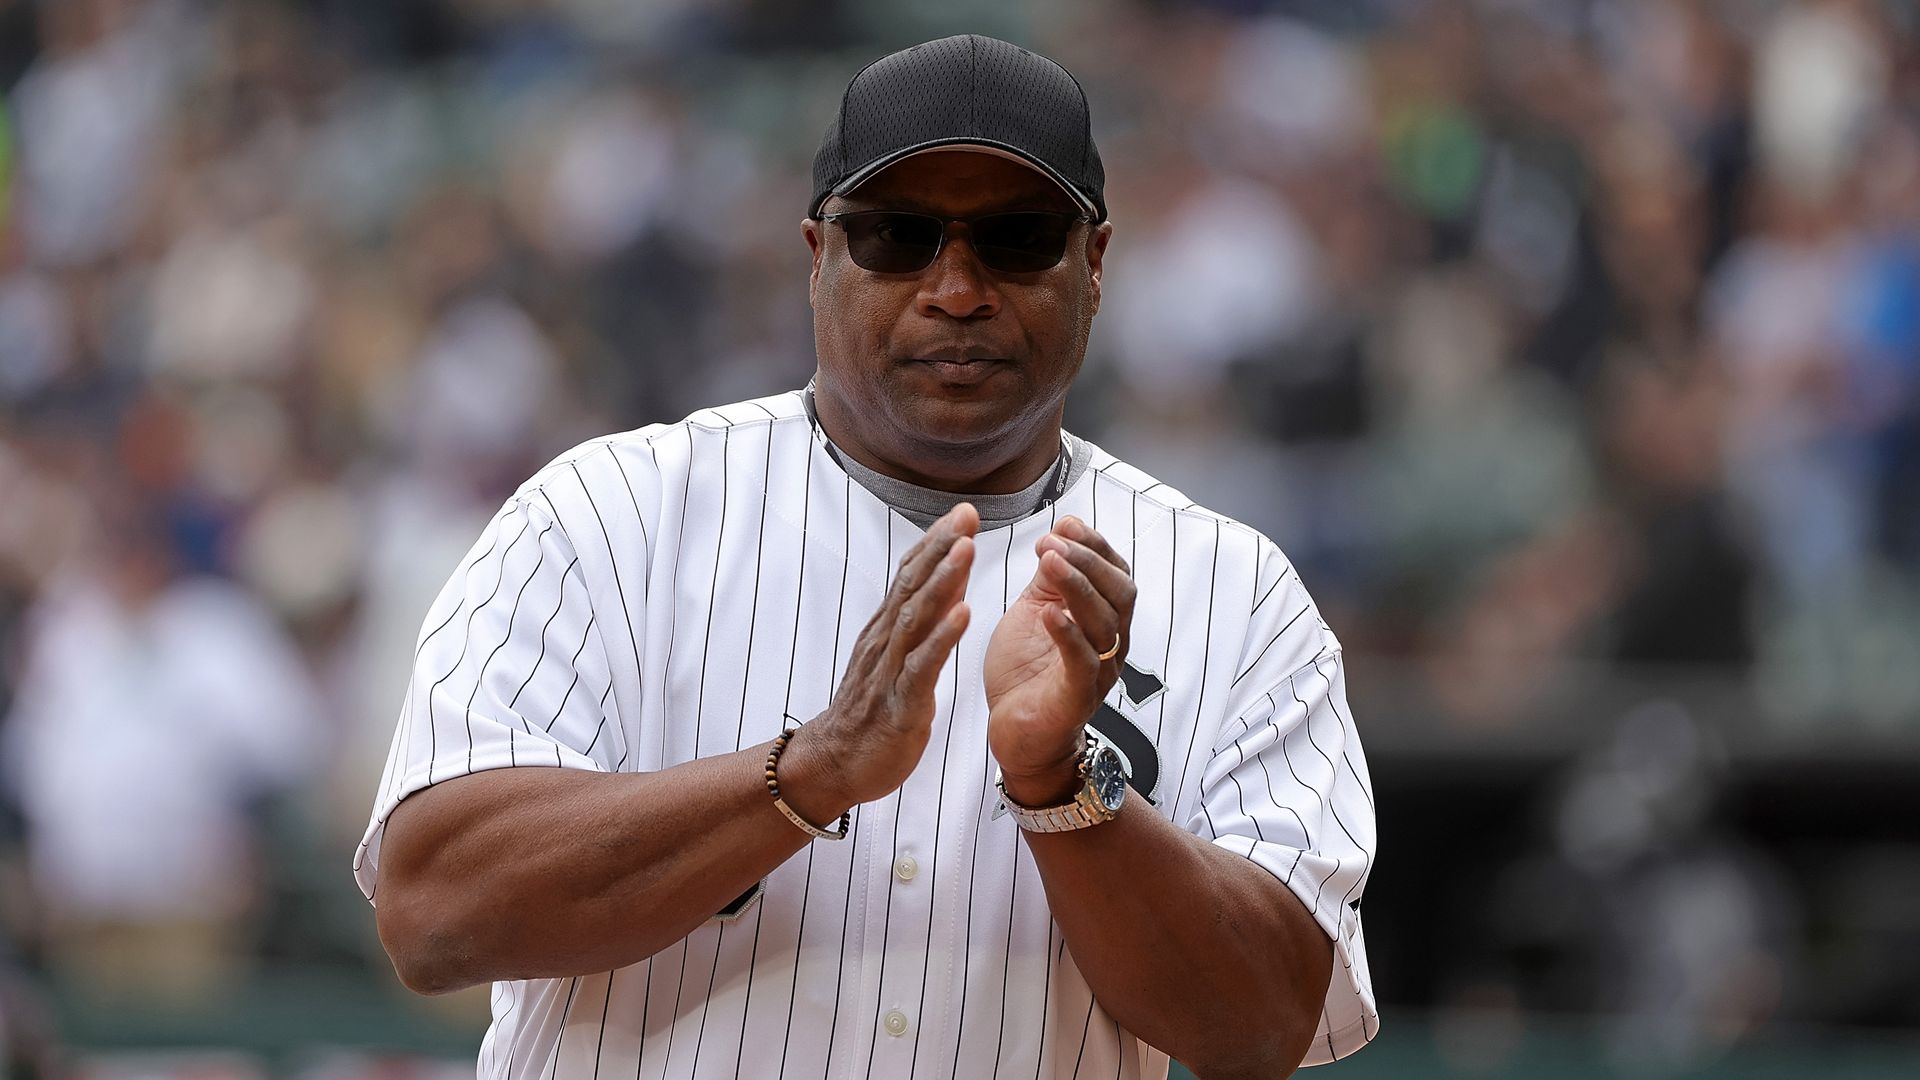 Sports star Bo Jackson on the field prior to a game between the Chicago White Sox and the Seattle Mariners on Opening Day at Guaranteed Rate Field on April 12, 2022 in Chicago, Illinois.